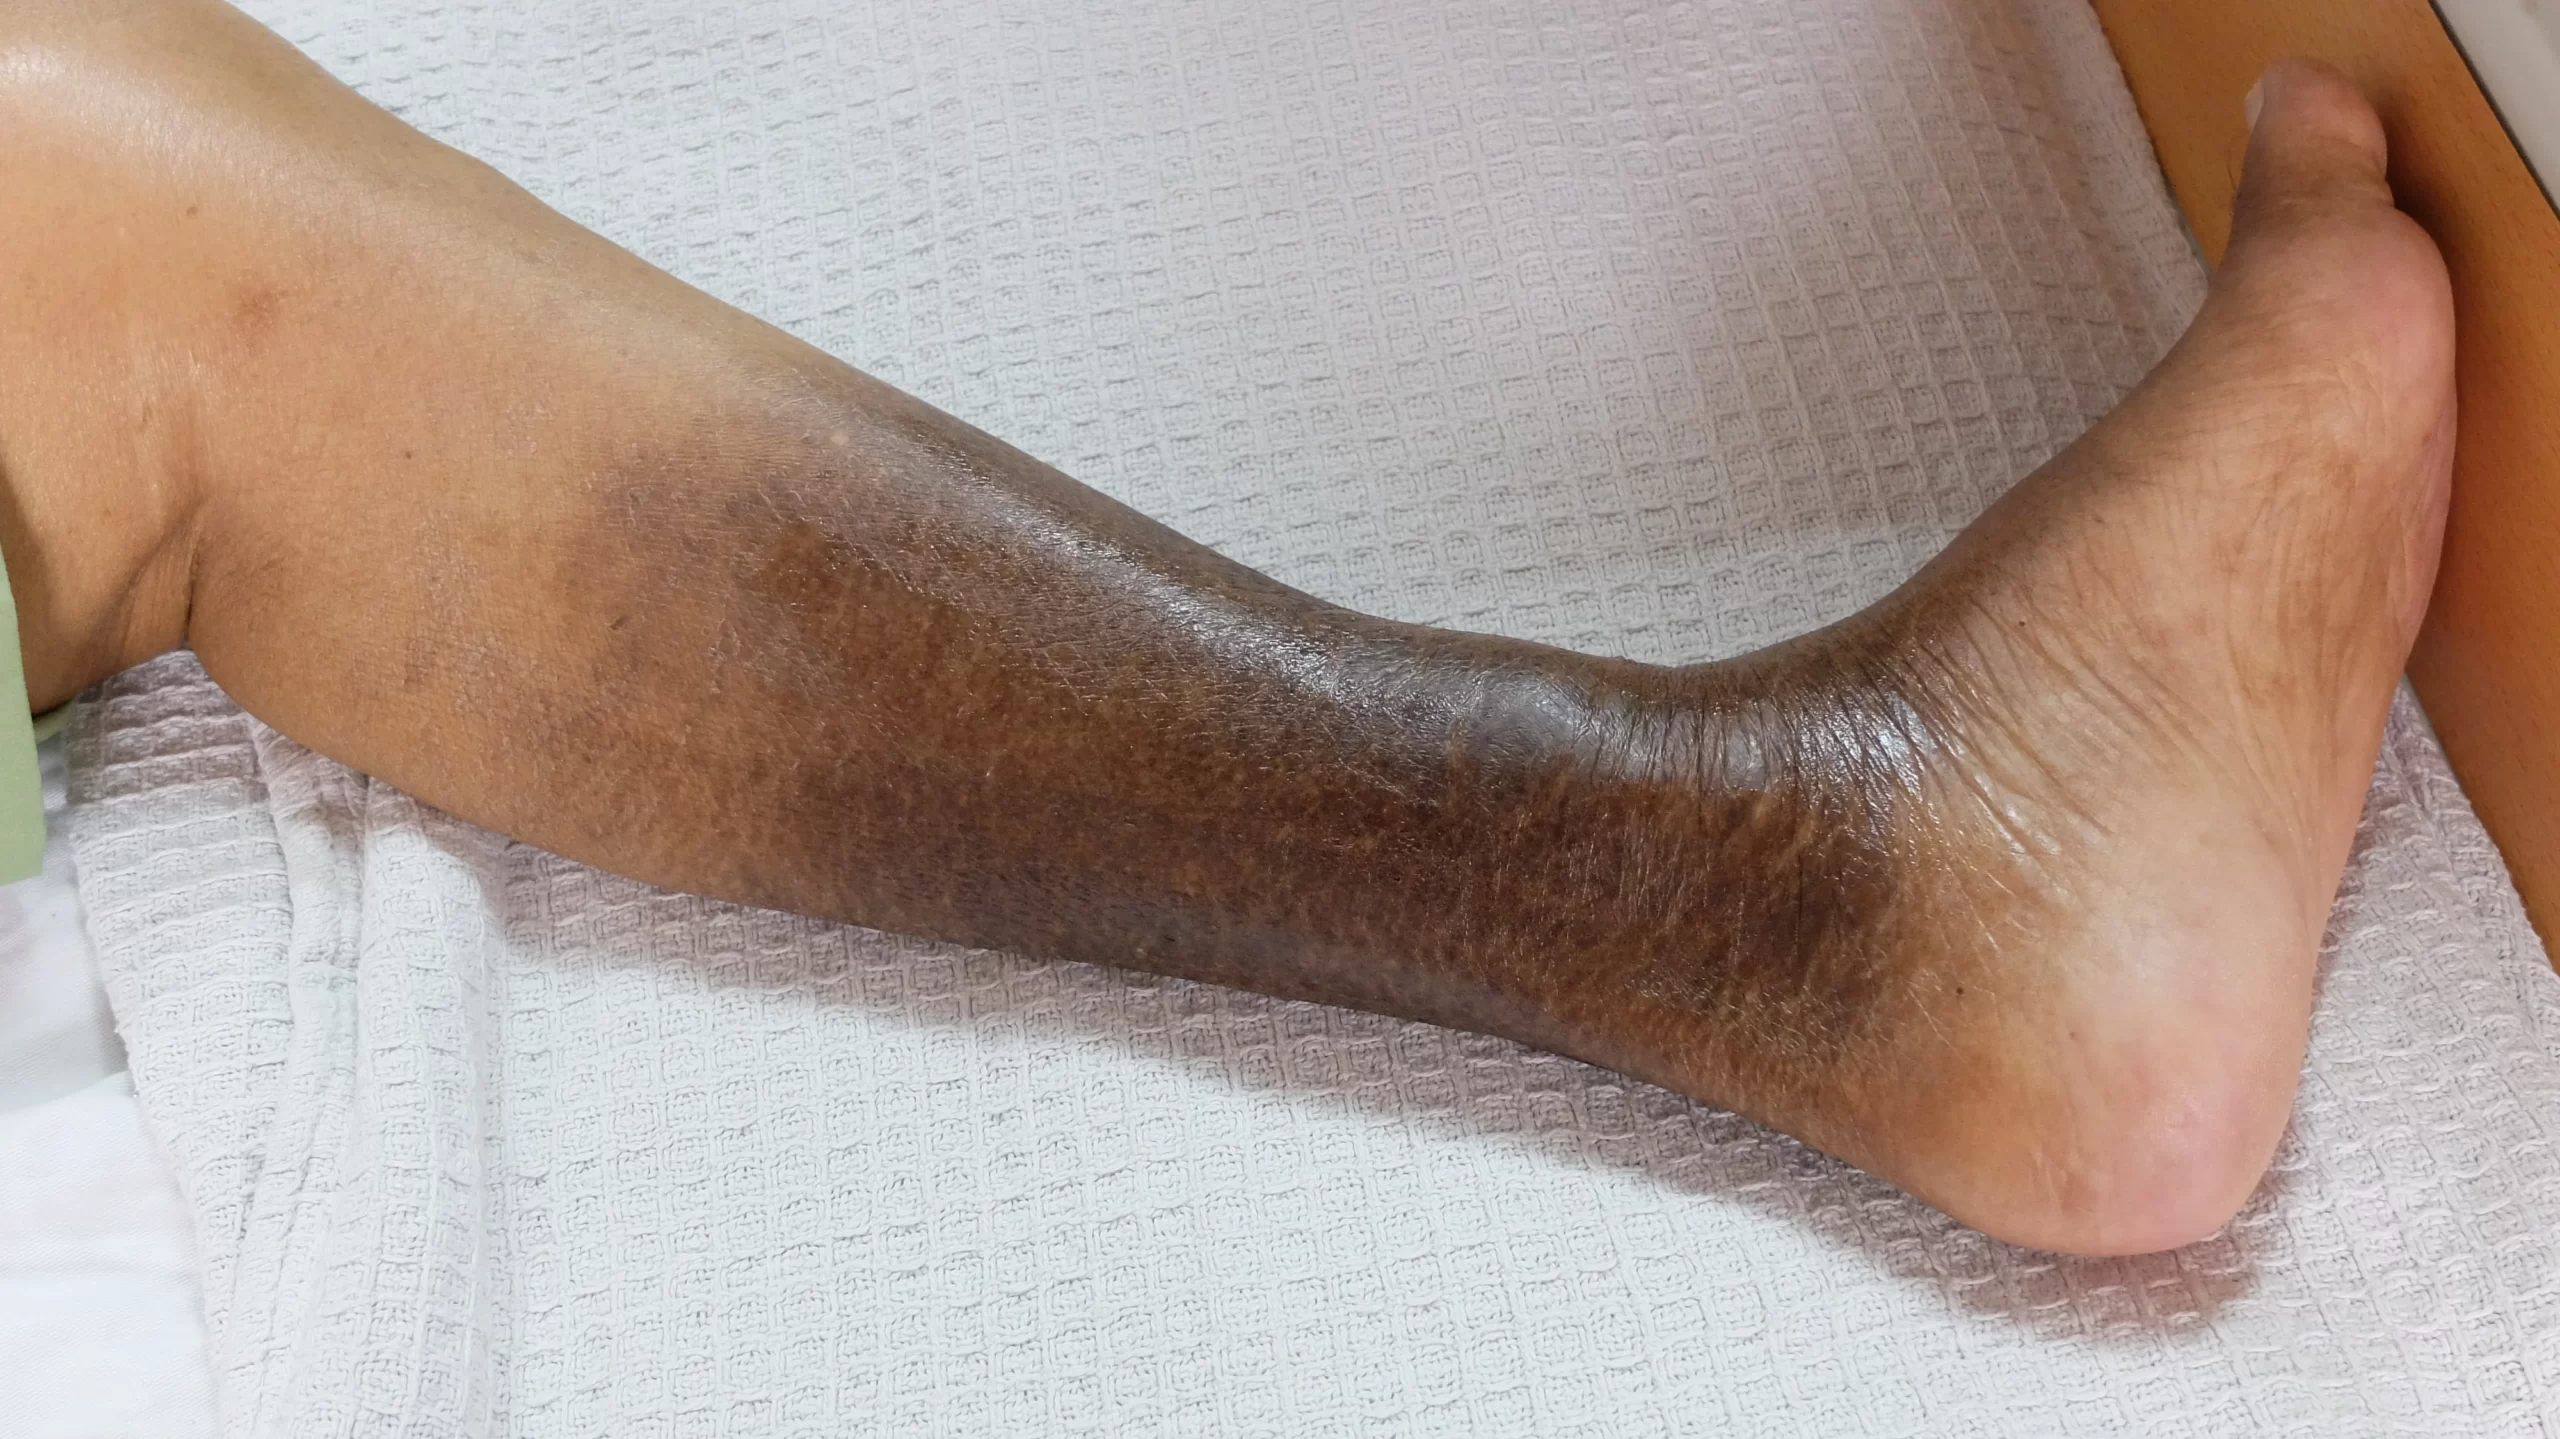 lower leg with hyperpigmentation and hardened skin